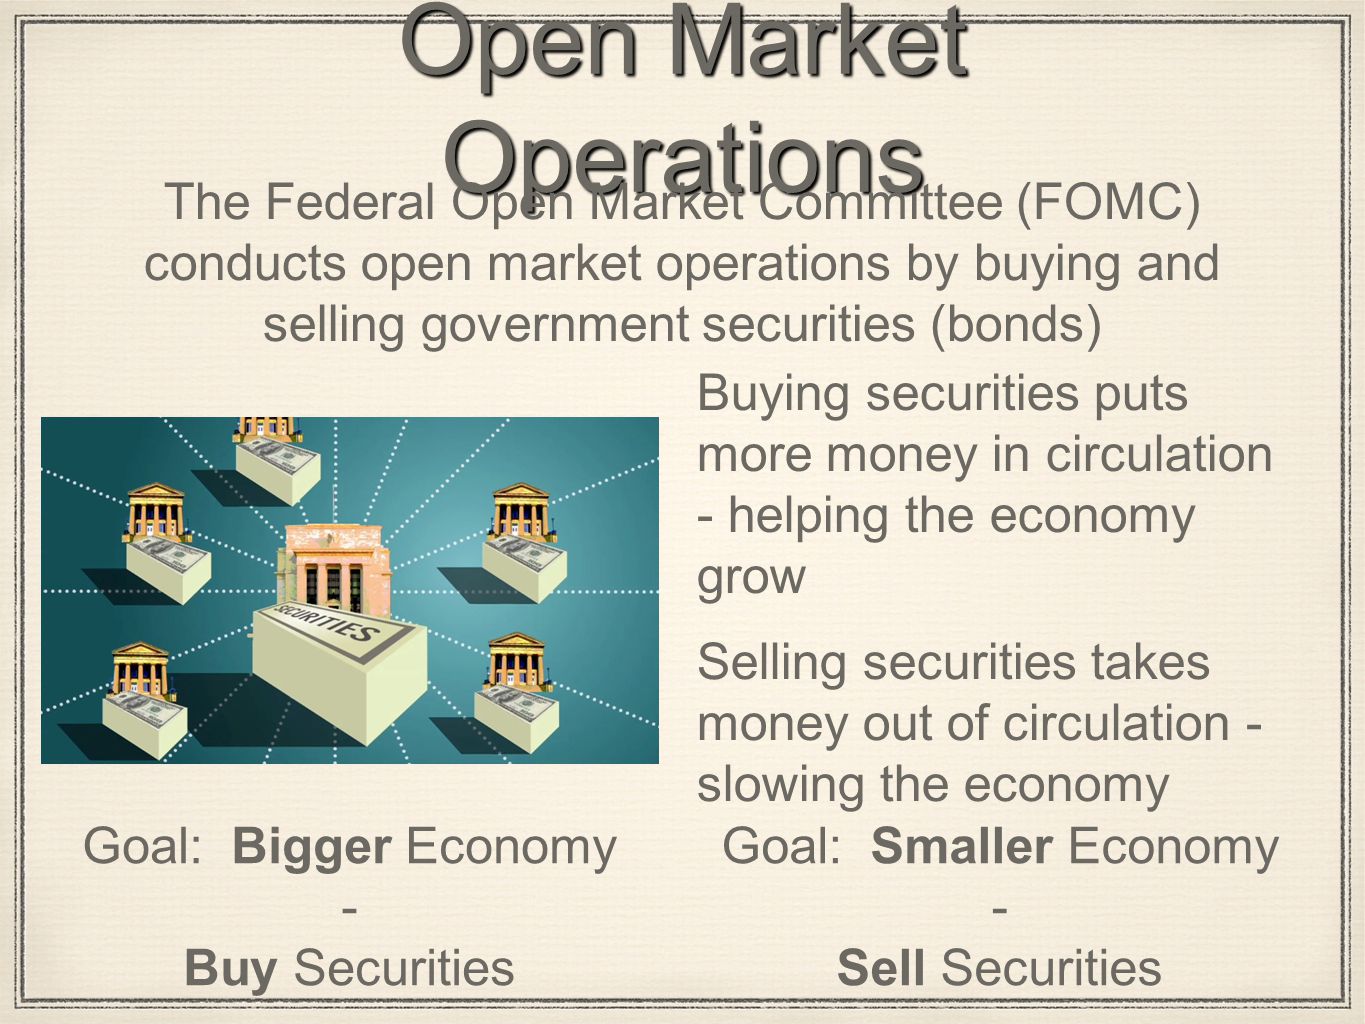 Open Market Operations The Federal Open Market Committee (FOMC) conducts open market operations by buying and selling government securities (bonds) Buying securities puts more money in circulation - helping the economy grow Selling securities takes money out of circulation - slowing the economy Goal: Bigger Economy - Buy Securities Goal: Smaller Economy - Sell Securities